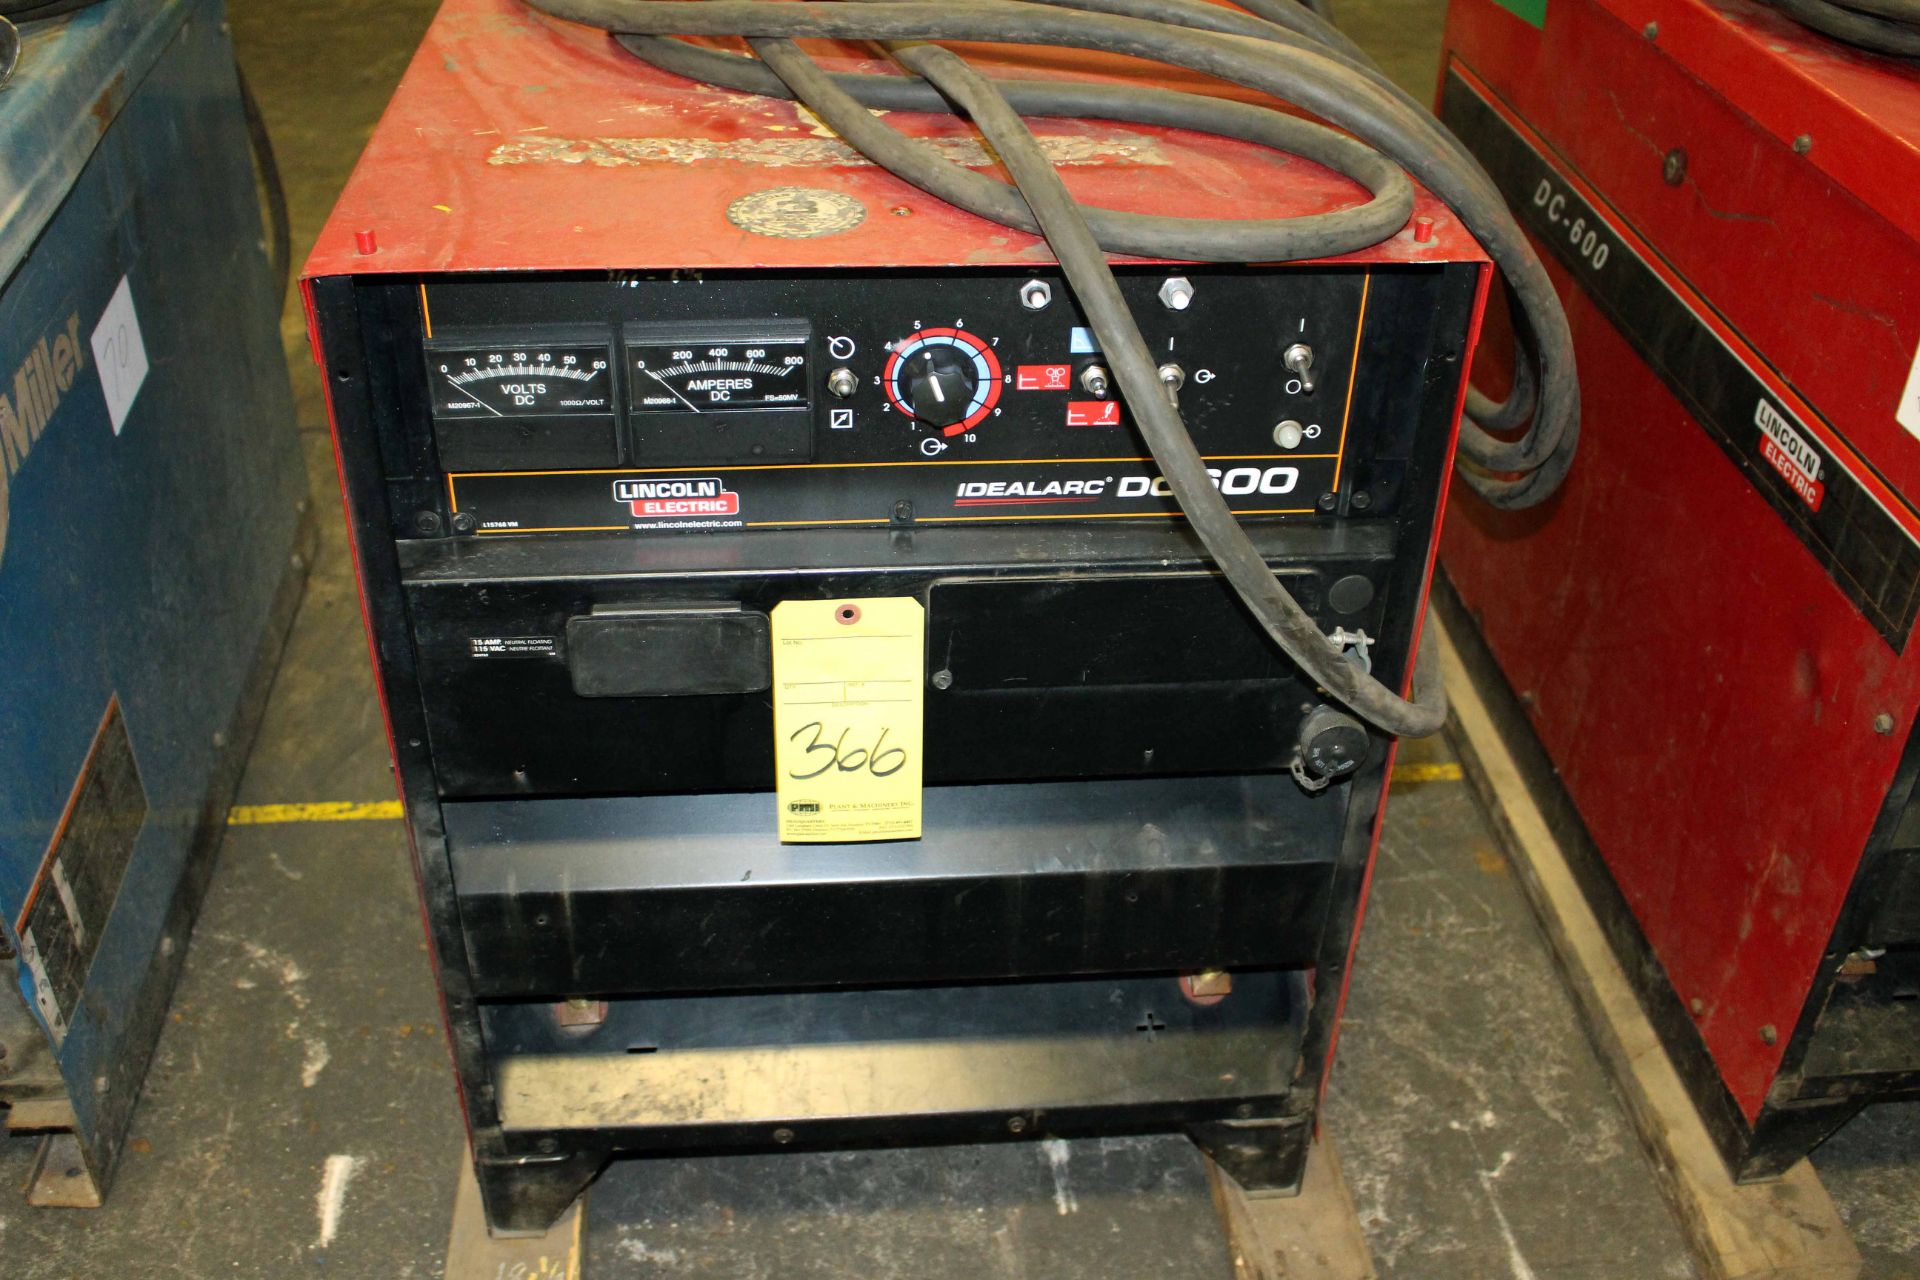 WELDING MACHINE, LINCOLN MDL. IDEAL ARC DC-600, 600 amps., 40 v. @100% duty cycle, S/N 4112C408144